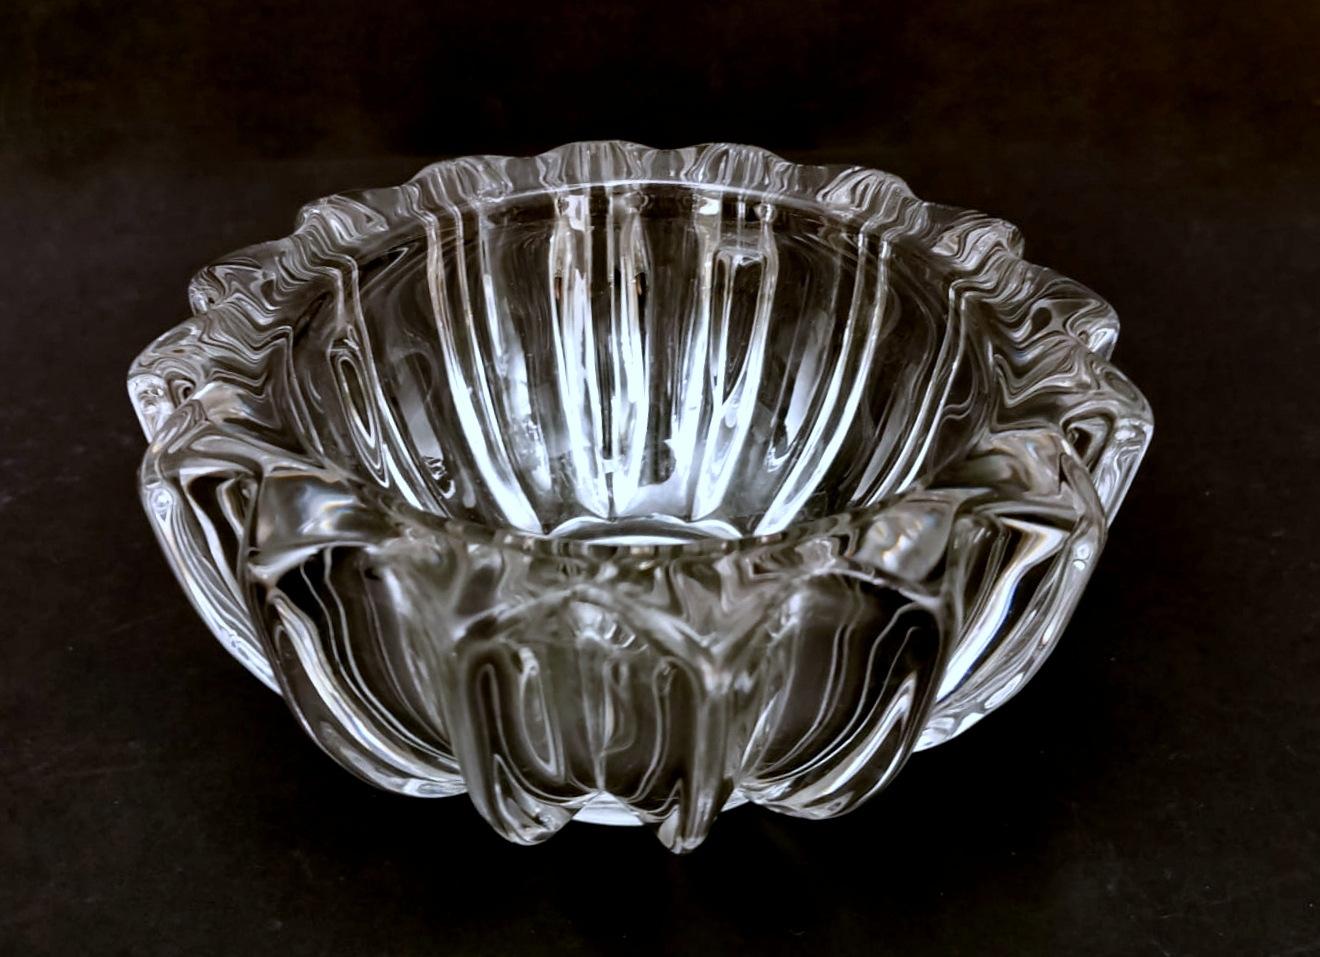 We kindly suggest that you read the entire description, as with it we try to give you detailed technical and historical information to guarantee the authenticity of our objects.
Original and iconic molded glass bowl; its shape is simple and